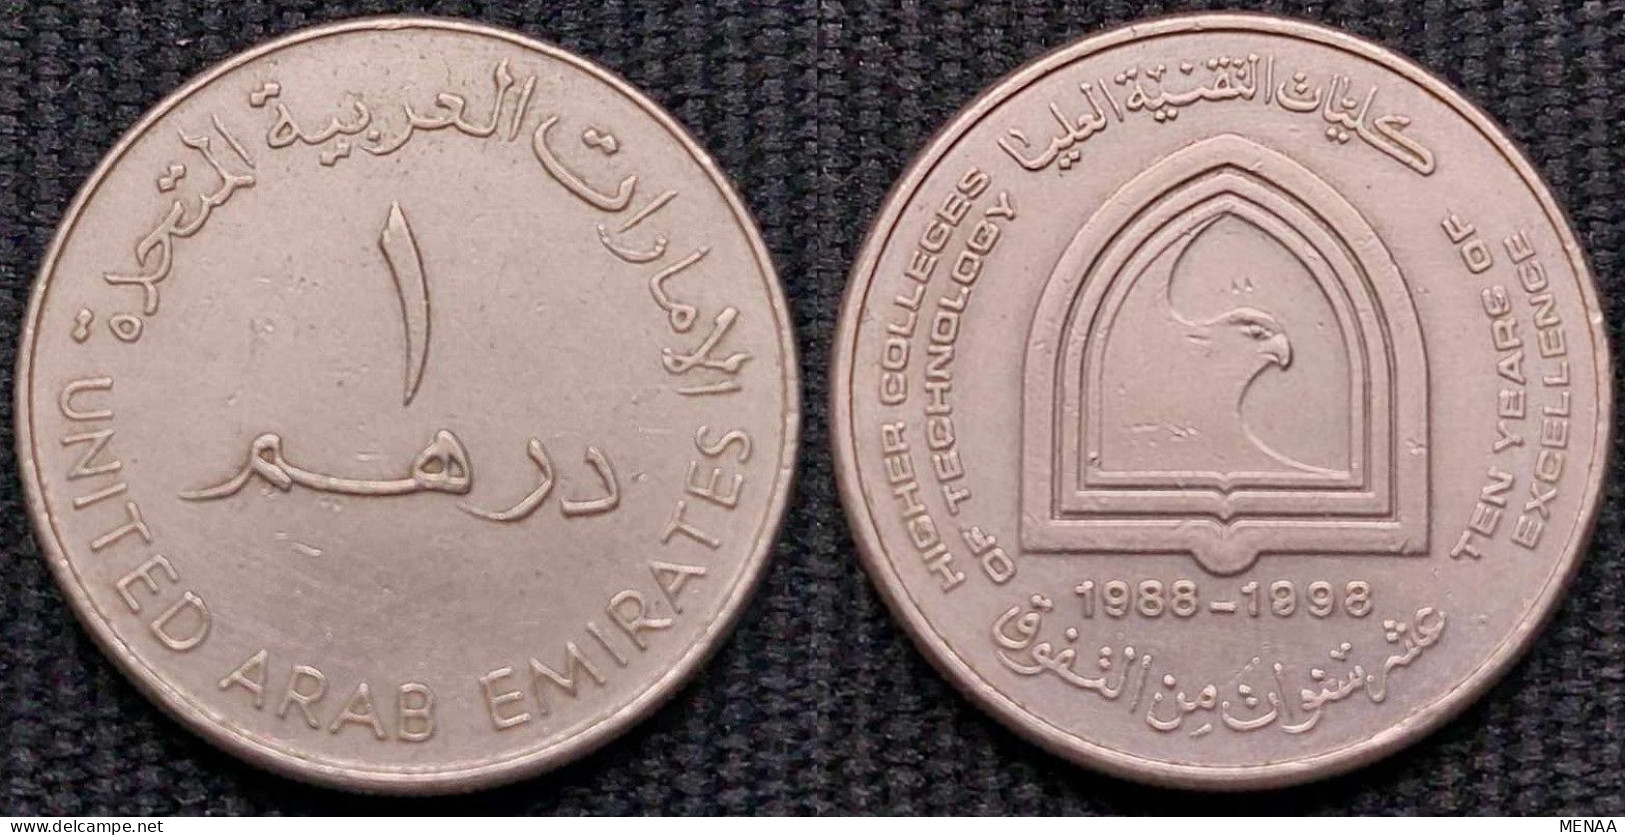 United Arab Emirates - 1 Dirham -1998 - The 10th Anniversary Of The Higher Colleges Of Technology-  - KM 35 - Ver. Arab. Emirate